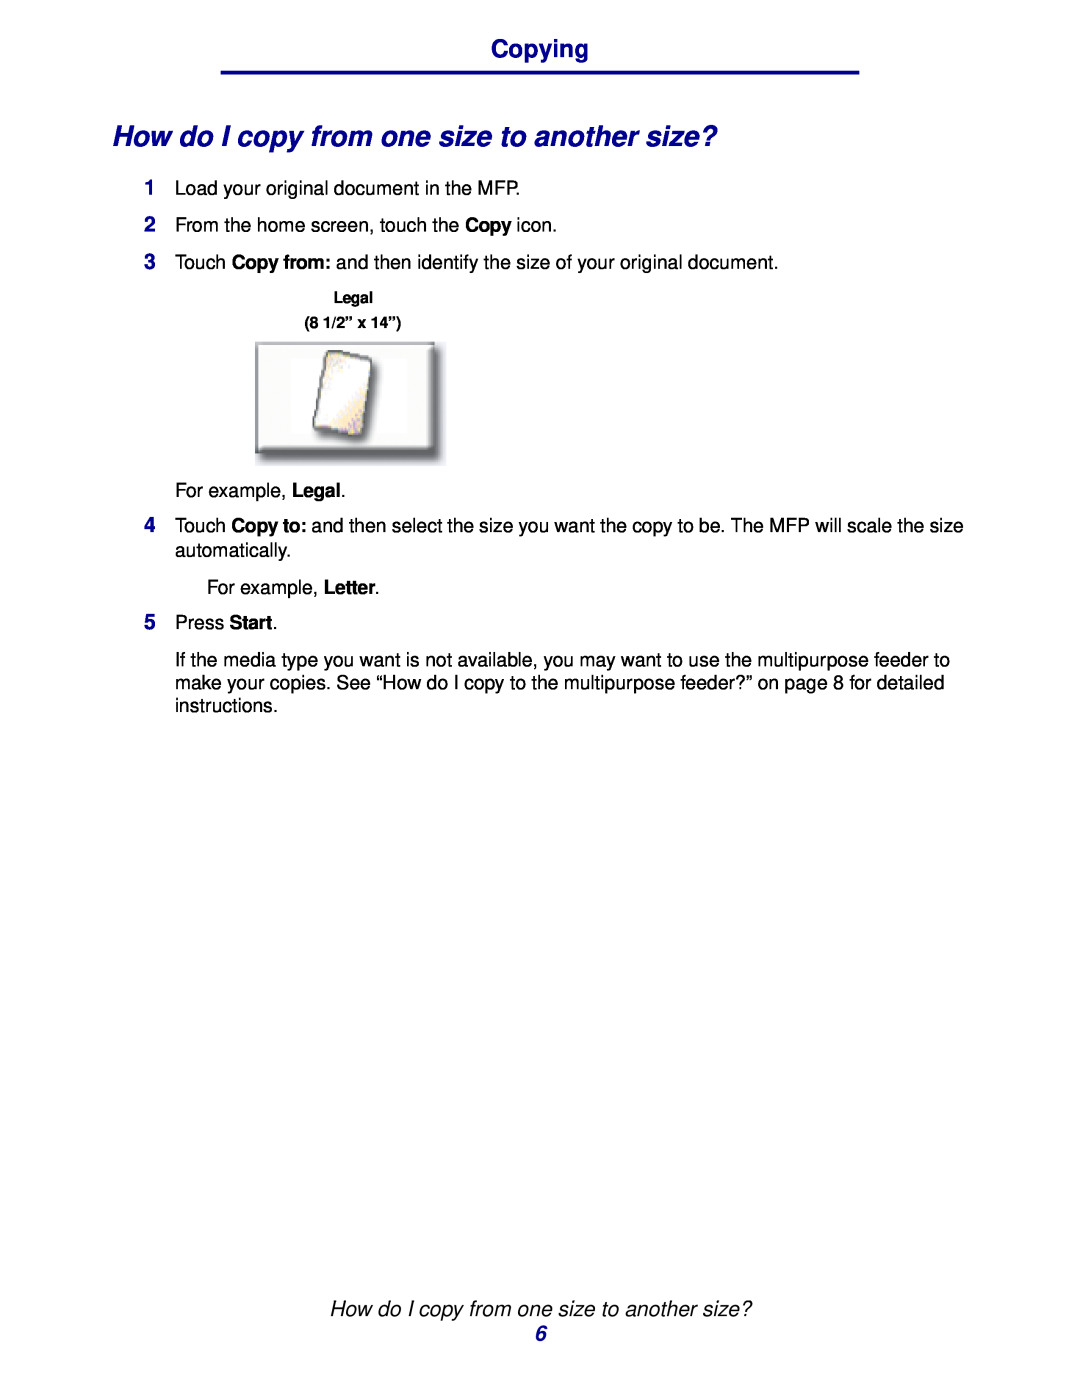 IBM MFP 35, MFP 30 manual How do I copy from one size to another size?, Copying 